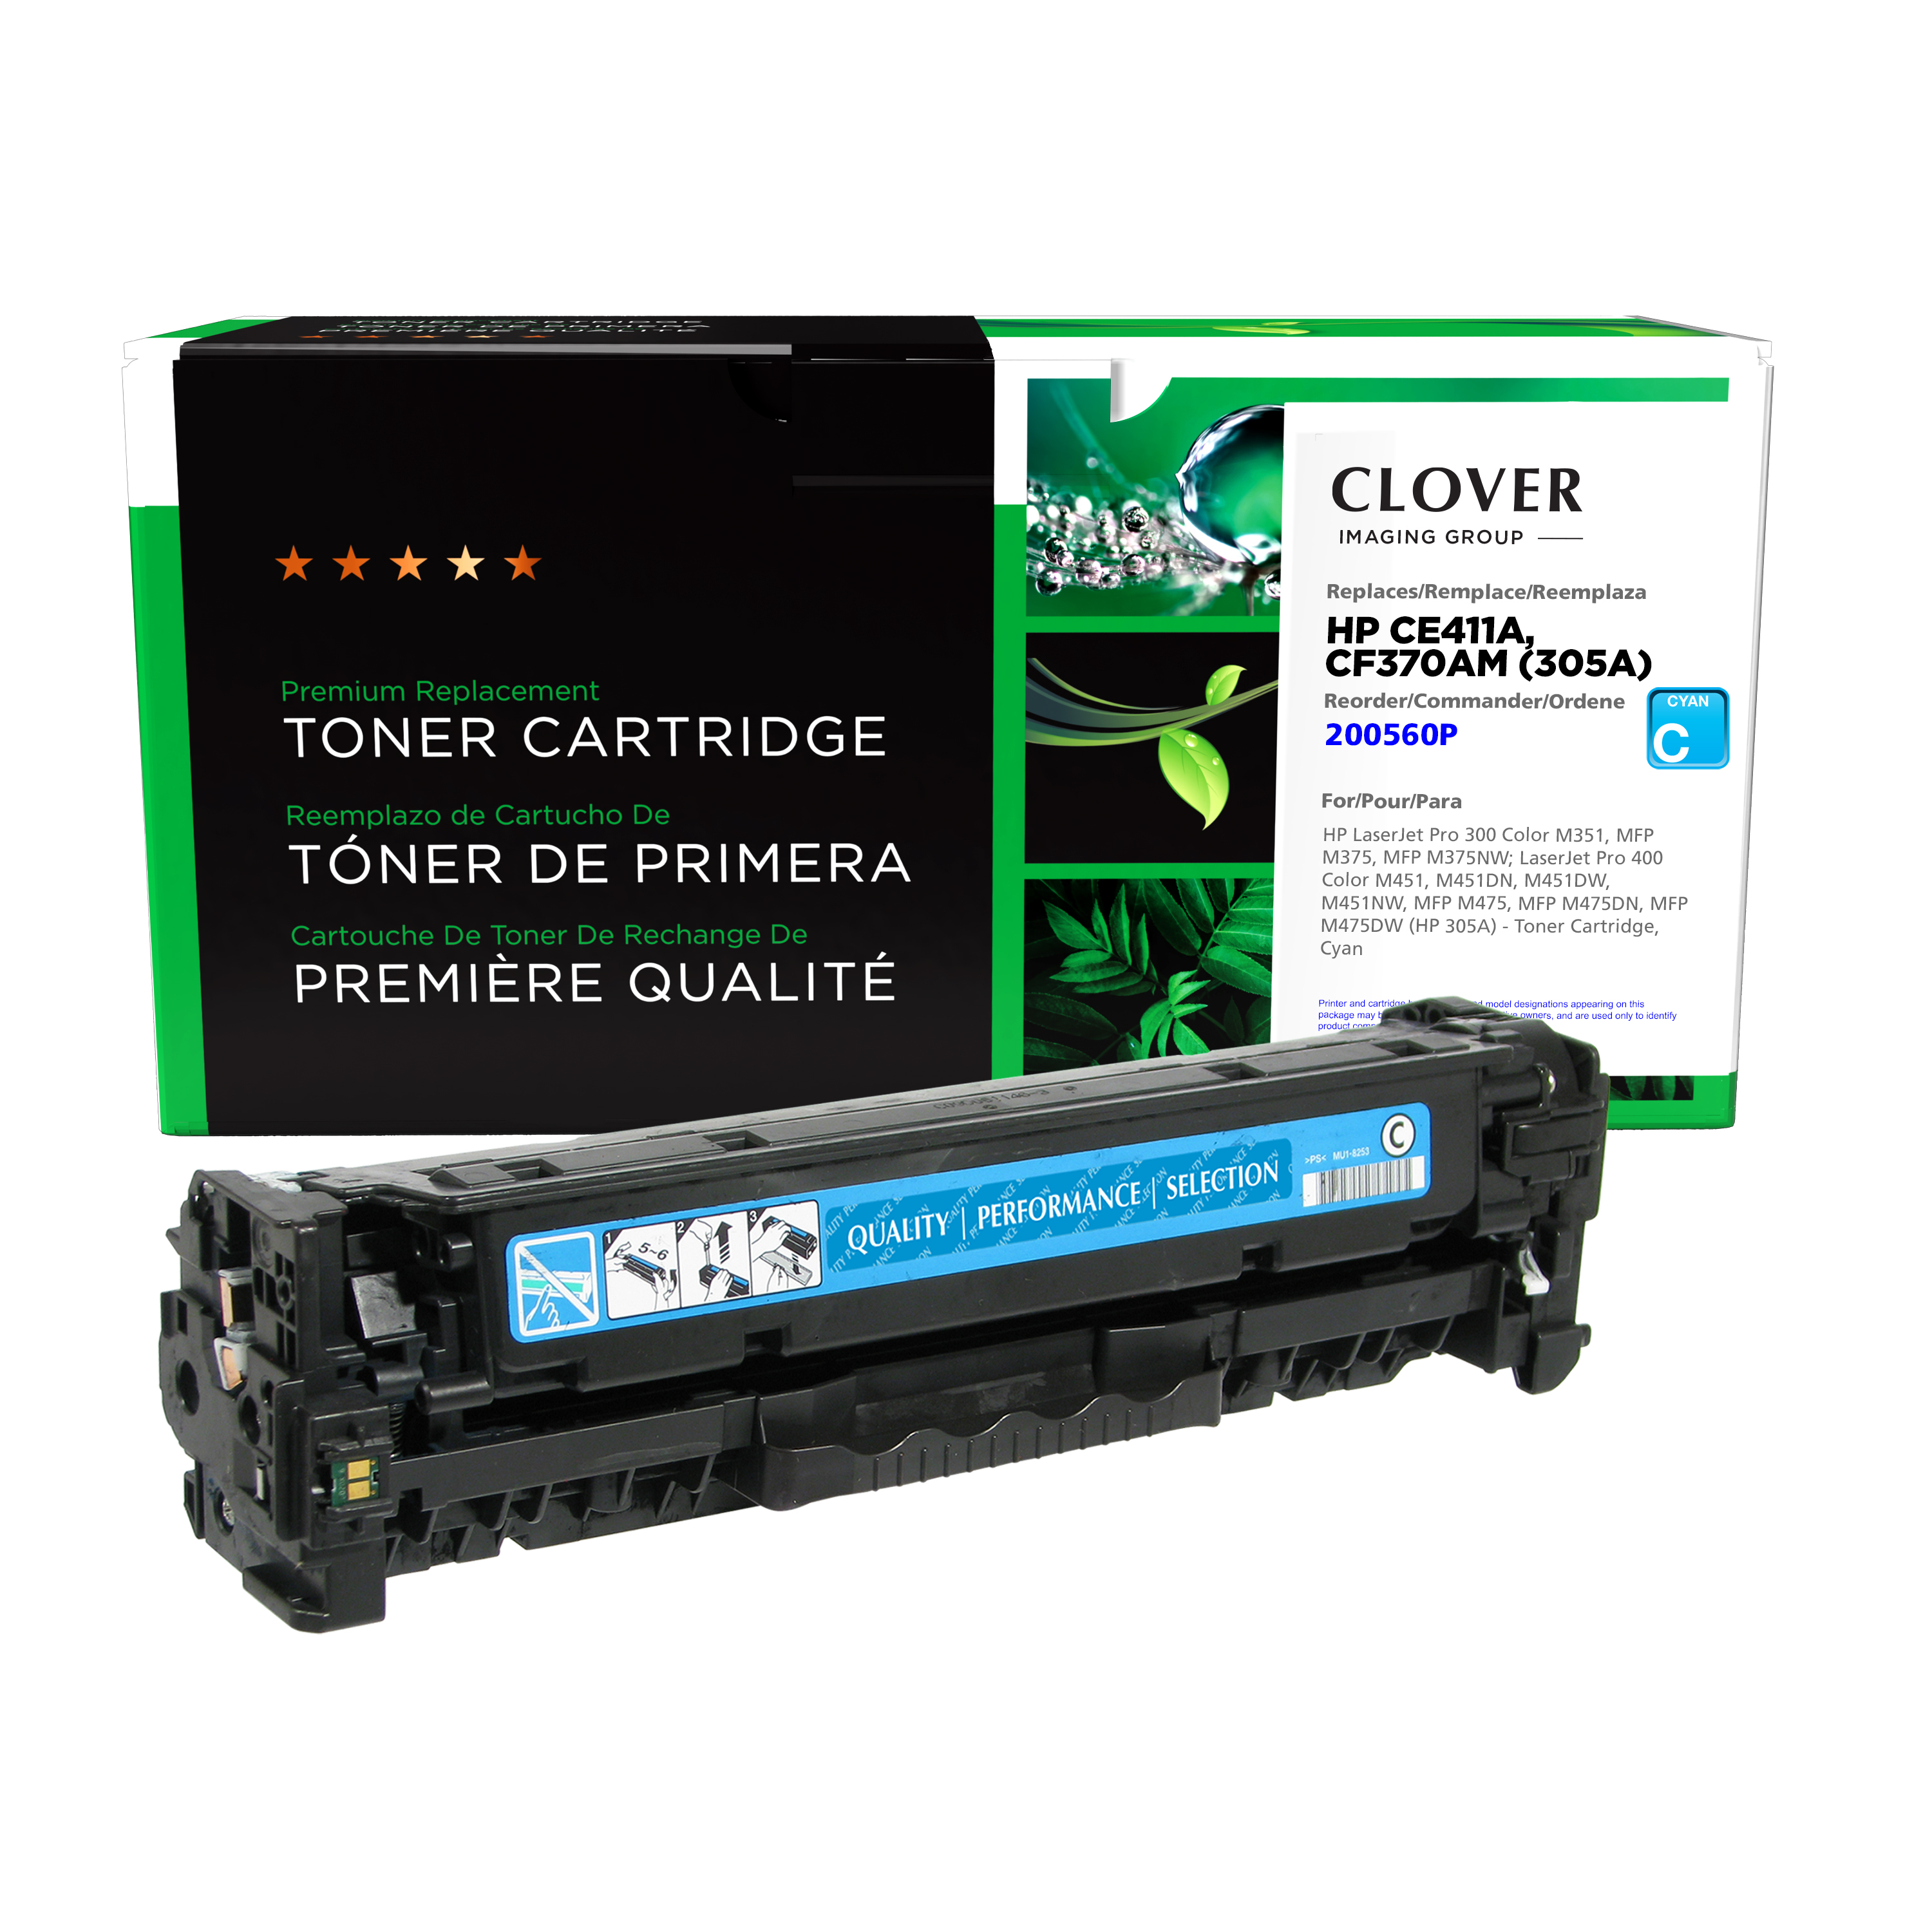 deelnemer Interactie eindeloos Clover Imaging Remanufactured Extended Yield Cyan Toner Cartridge for HP  CE411A (HP 305A)